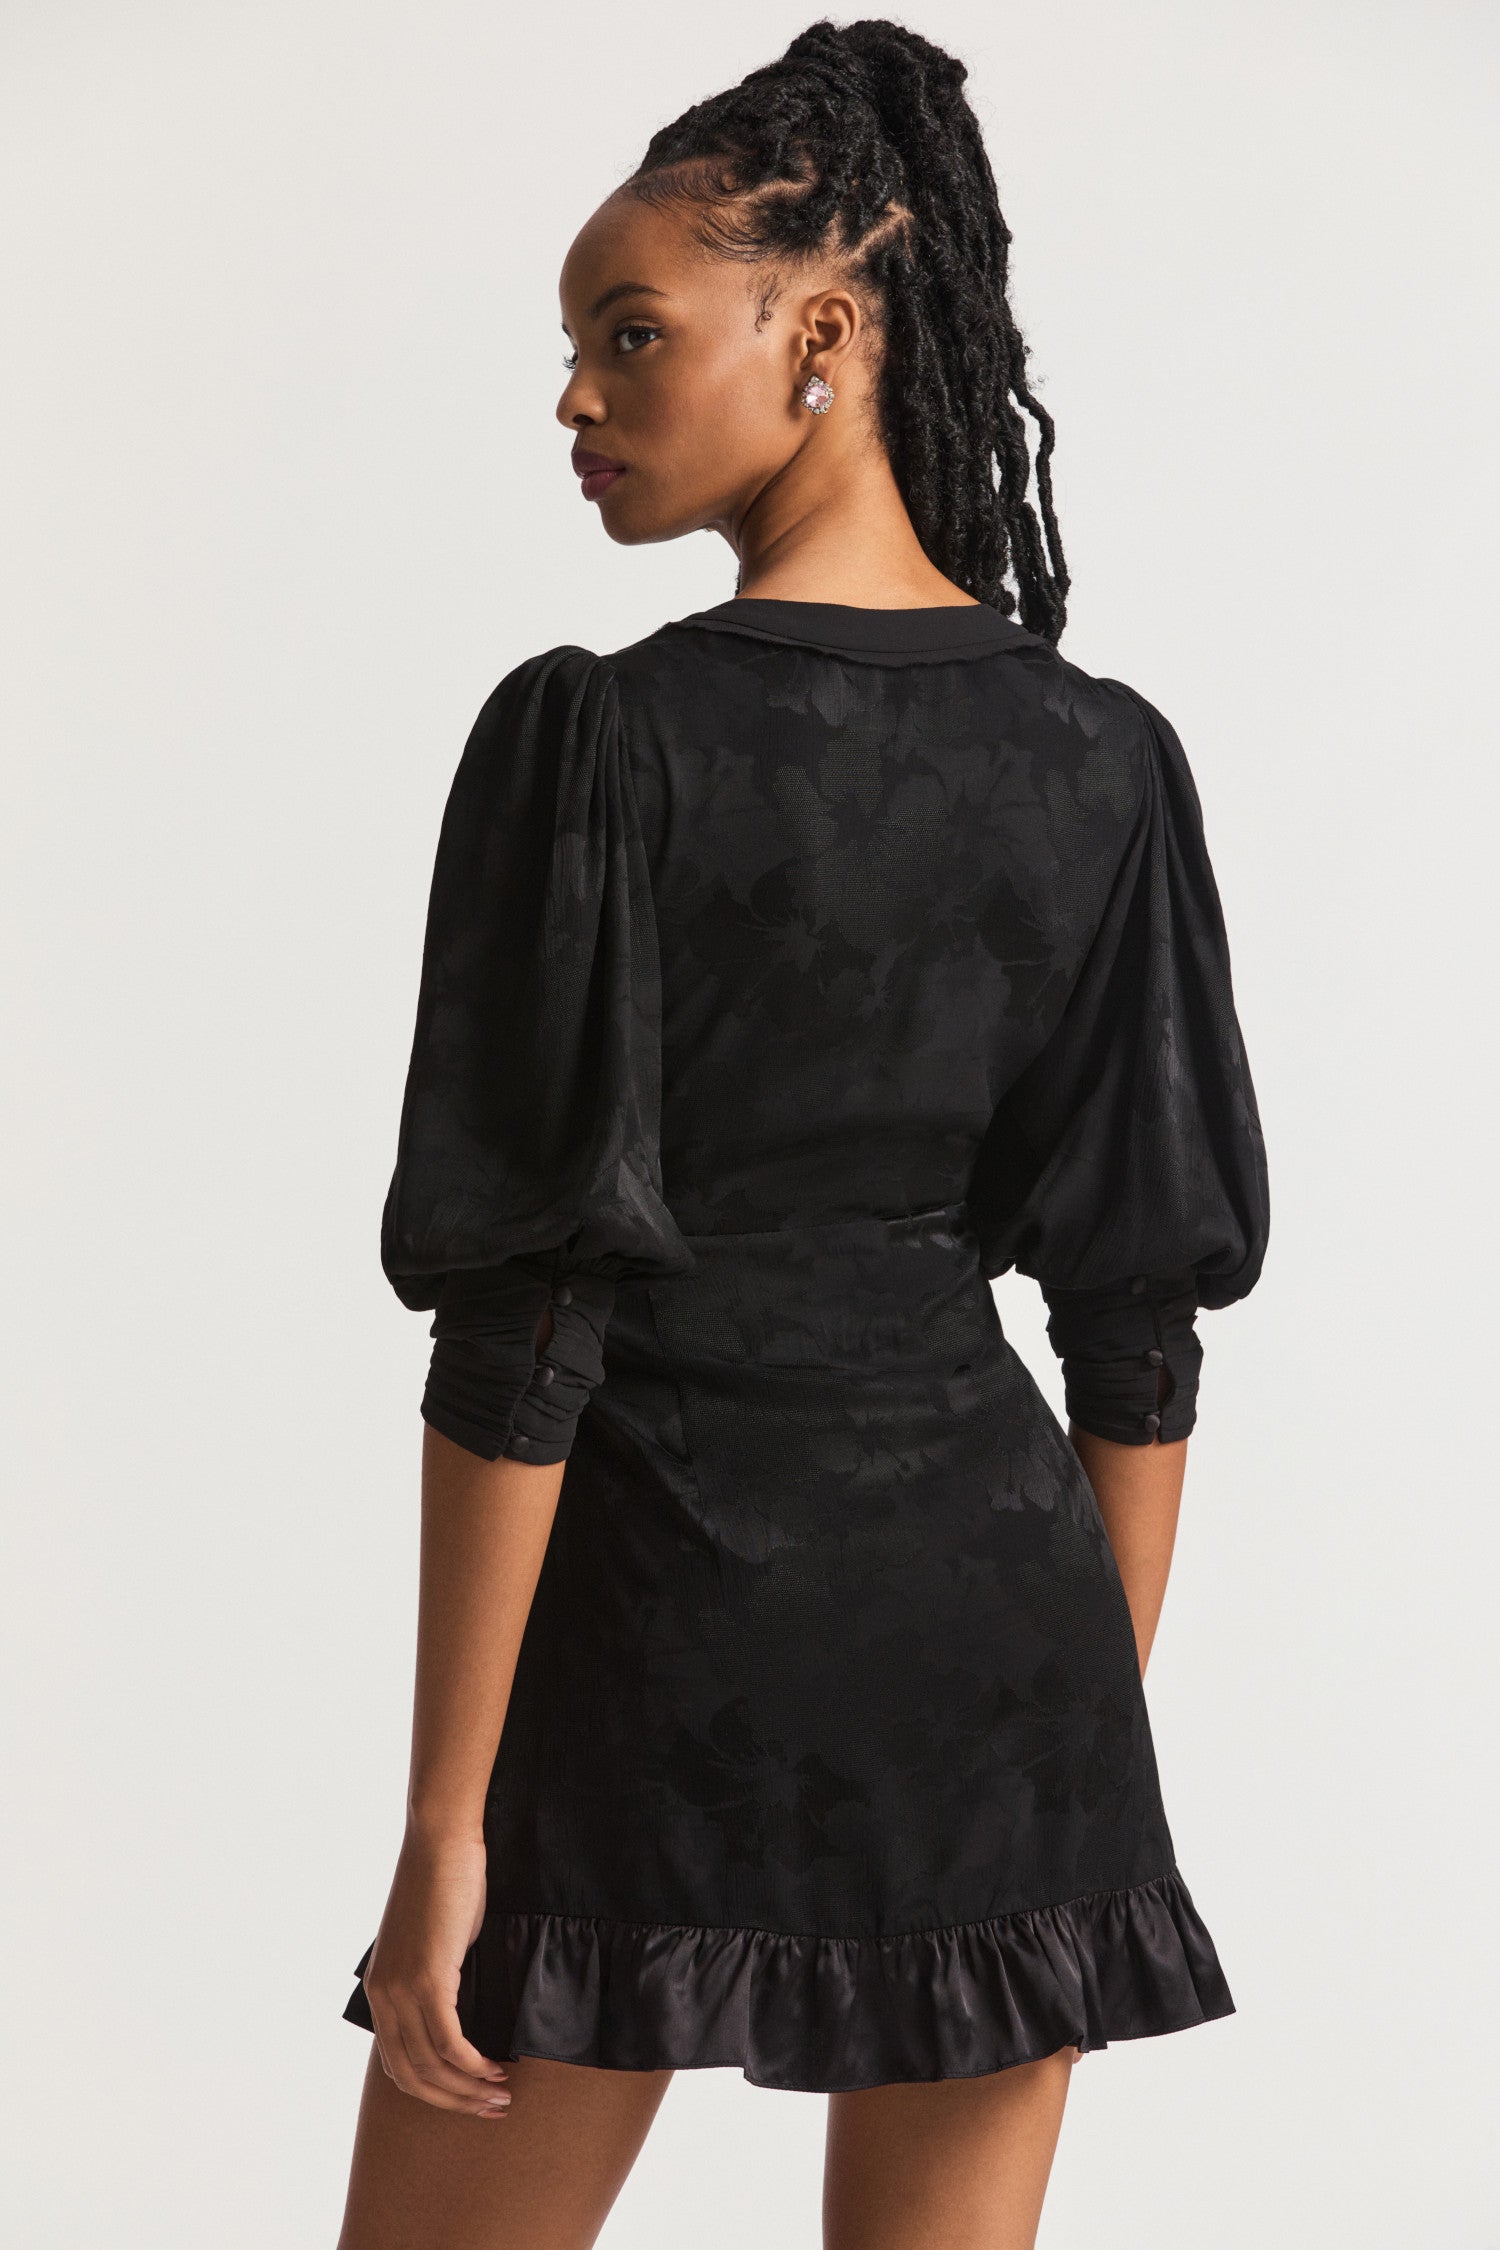 Black Mini Dress with a combination of charmeuse and chiffon. Blouson sleeves, a deep v that falls to a flattering slim fit waist which releases into a princess skirt with tiered pretty ruffle detail at the hem. 